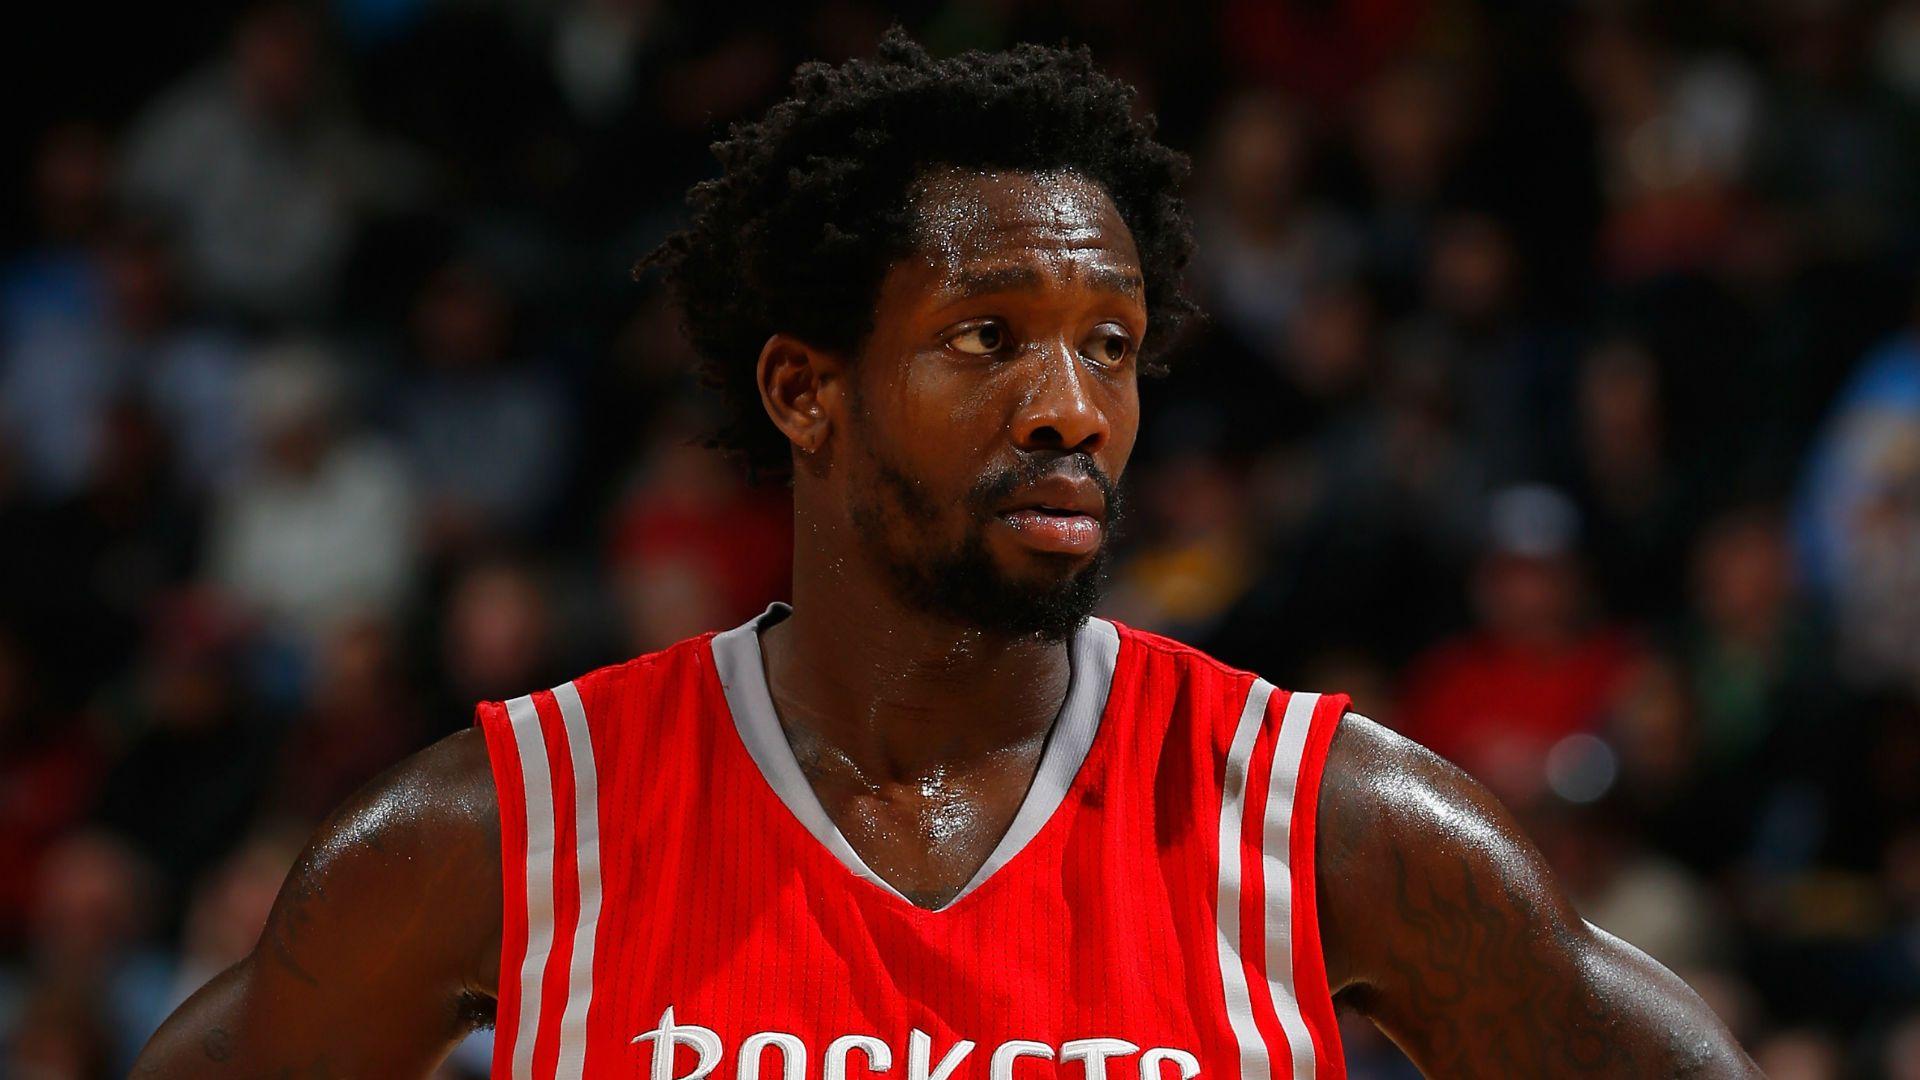 Rockets' Patrick Beverley: NBA needs to control rowdy fans or else